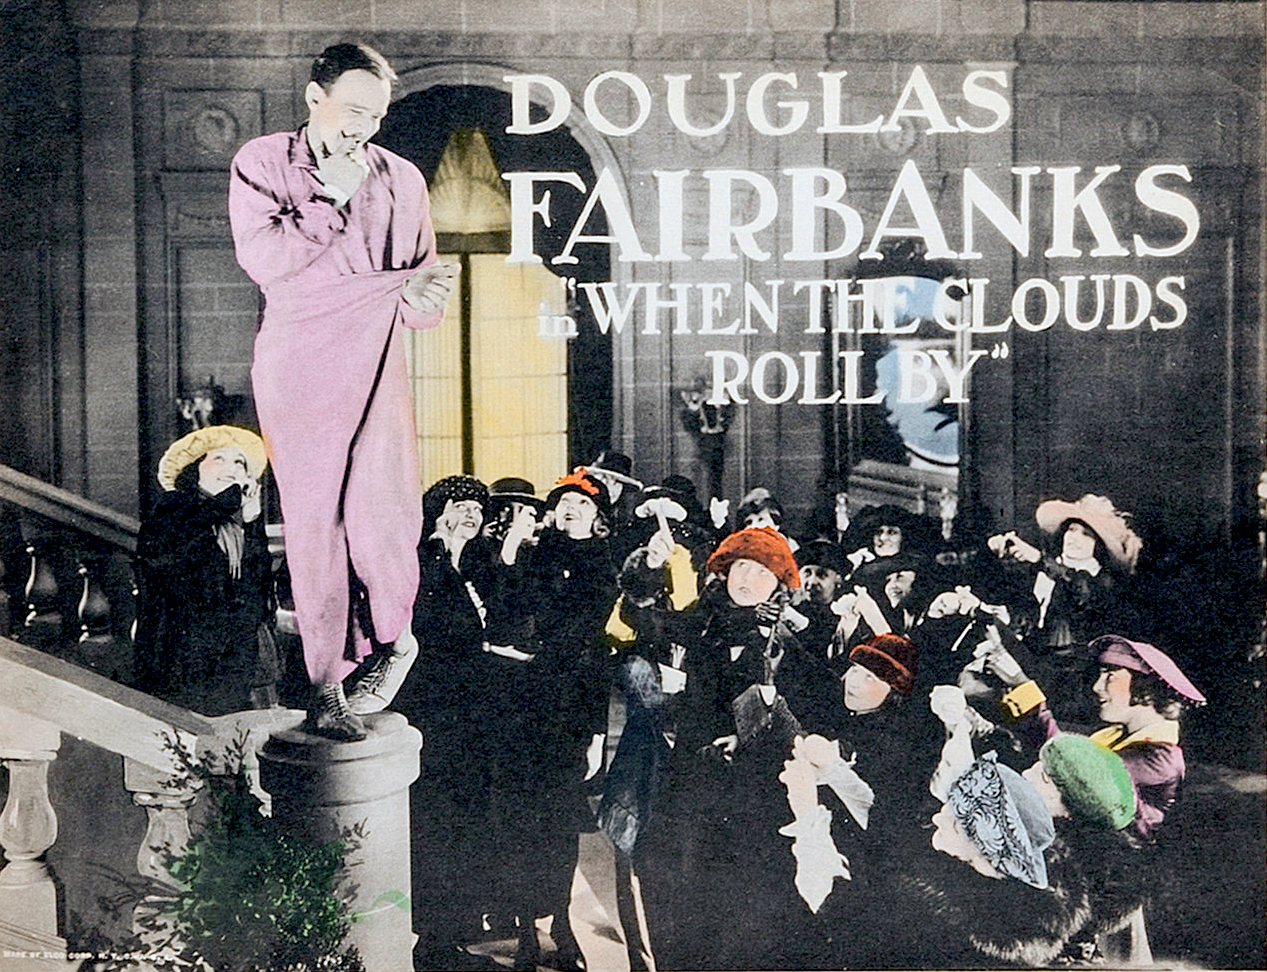 Lobby card for Douglas Fairbanks in WHEN THE CLOUDS ROLL BY (1919)